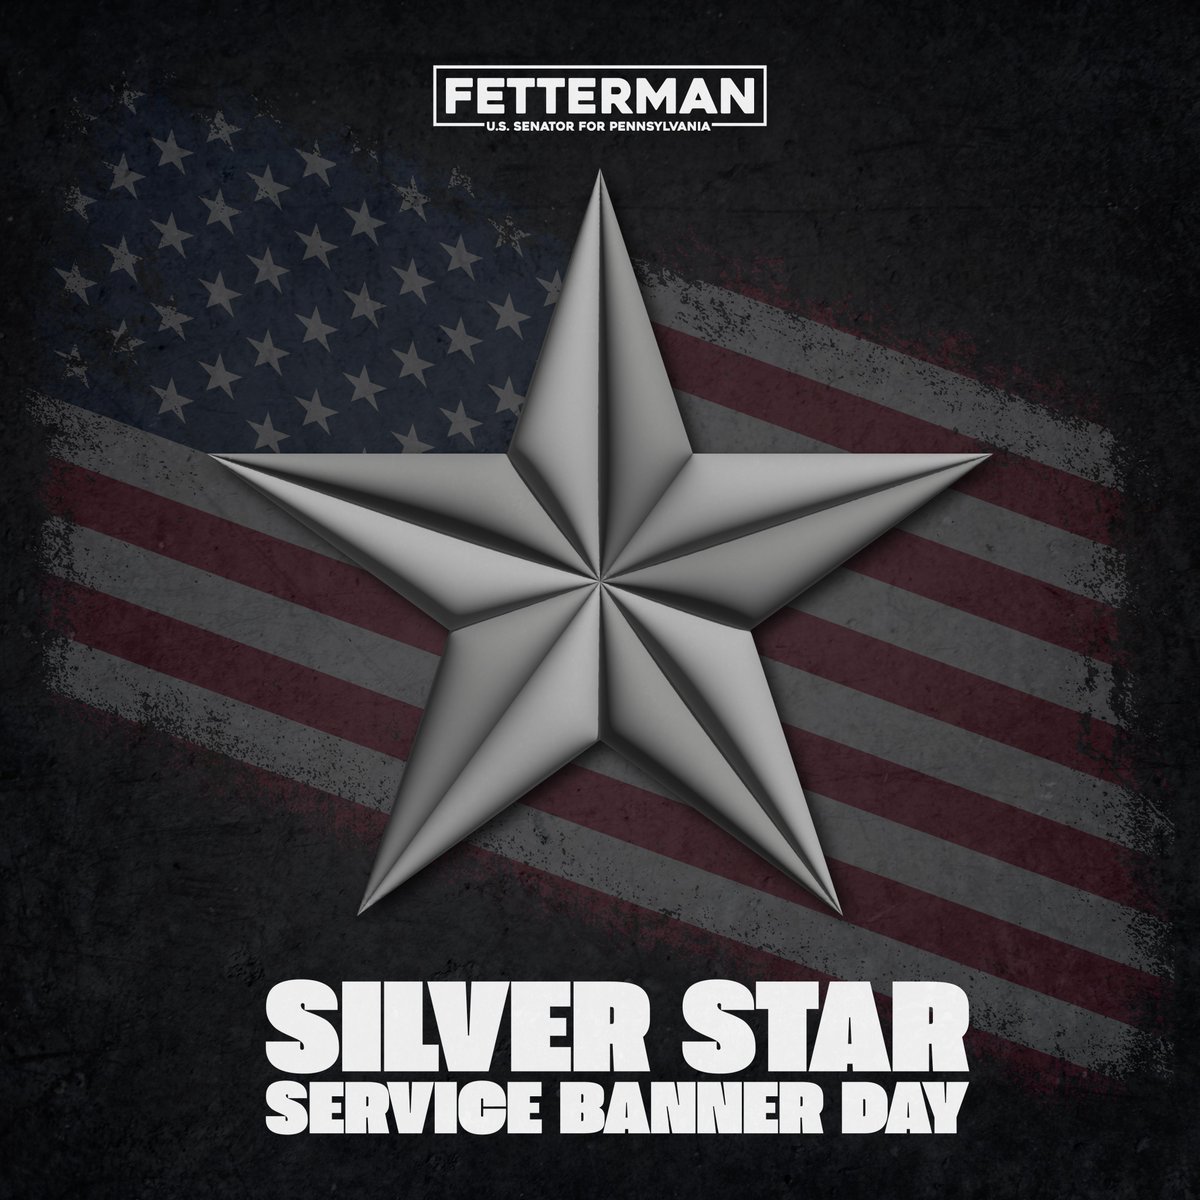 The Silver Star is the third-highest military decoration for valor in combat, given to numerous servicemembers from PA and across the country who answered the call to serve.

Spending time today reflecting on their service and contributions to keeping our country safe and secure.